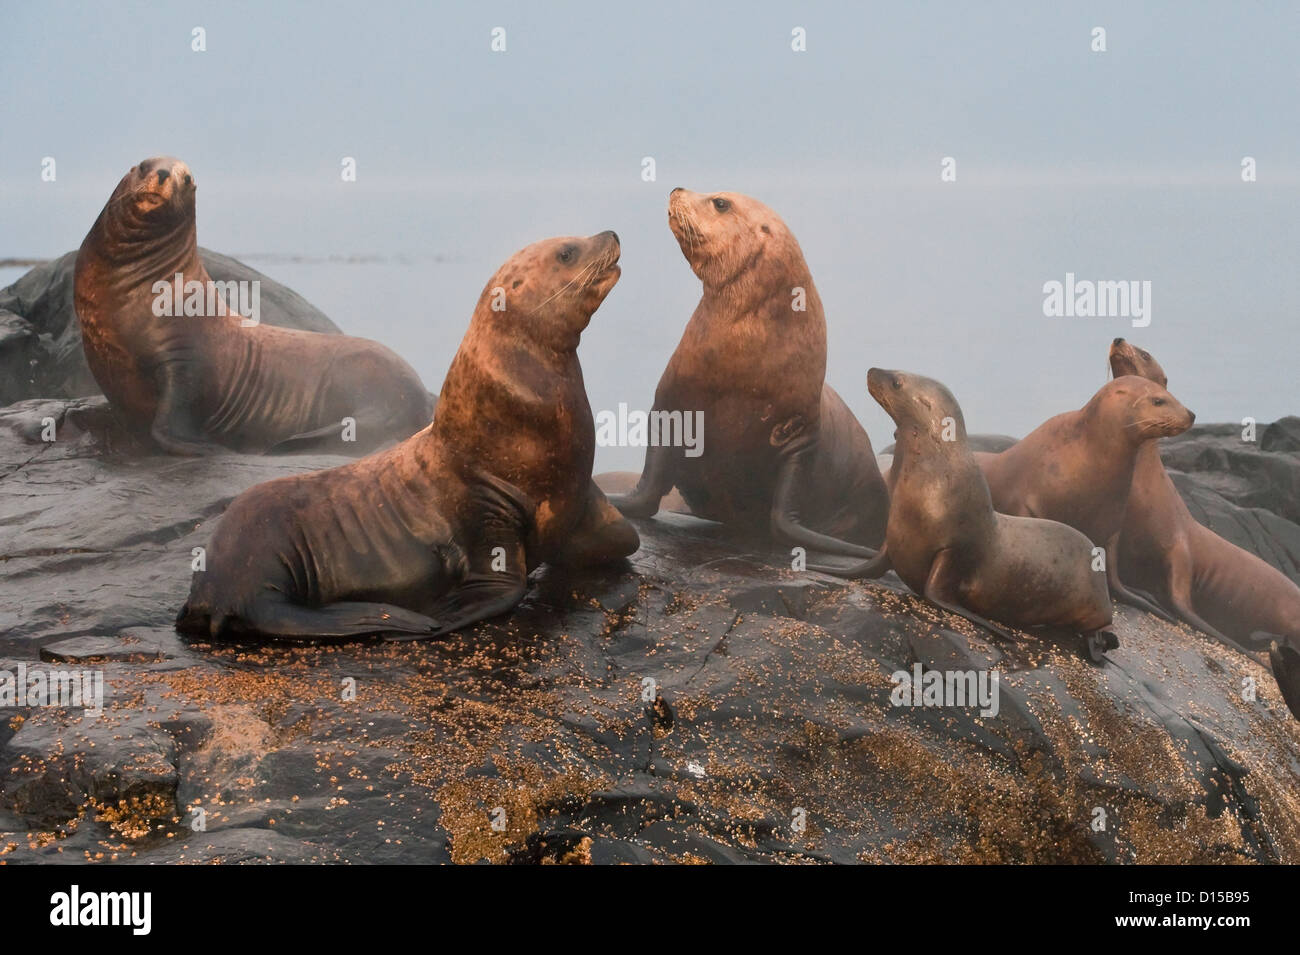 Steller Sea Lions, Eumetopias jubatus, an endangered species, congregate on a rocky island north of Vancouver Island, BC Stock Photo